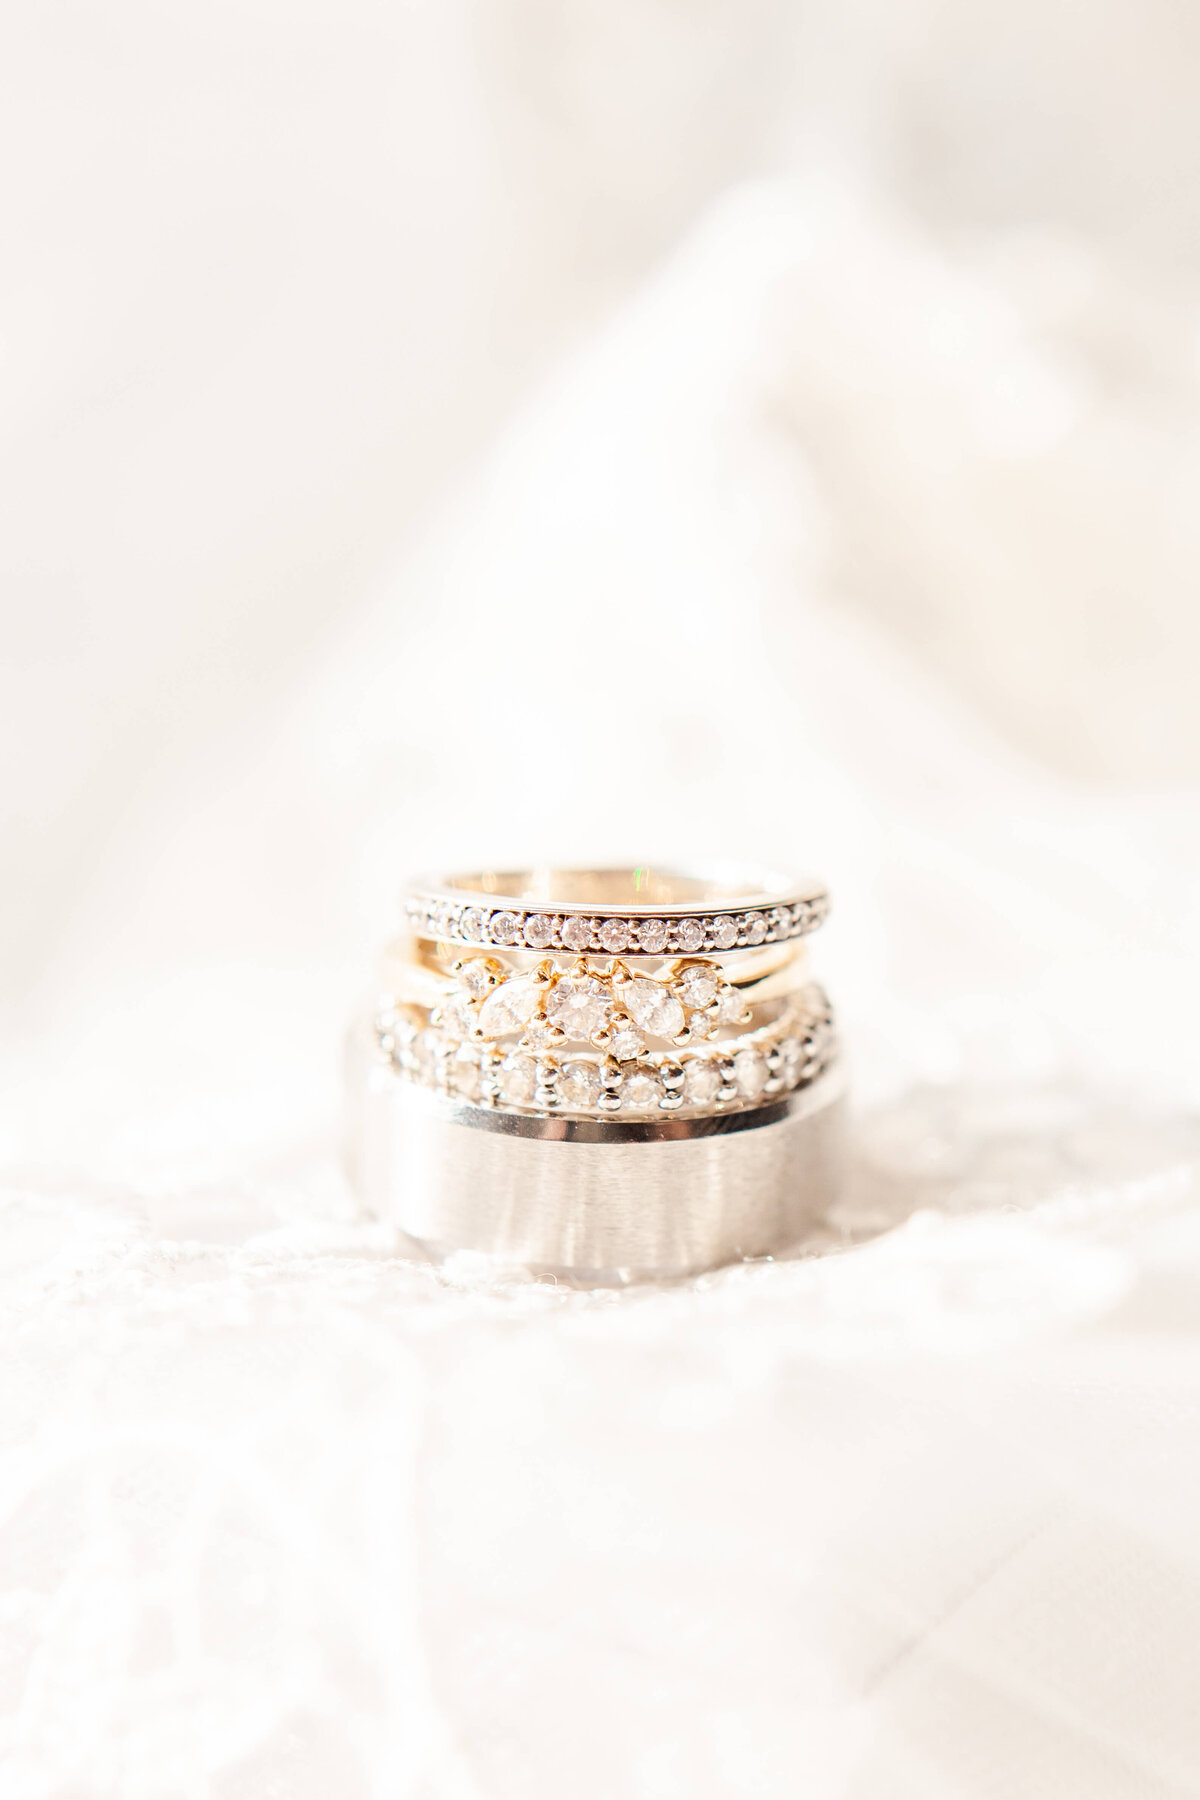 Wedding-engagement-rings-detail-shot-by-Bethany-Lane-Photography-3